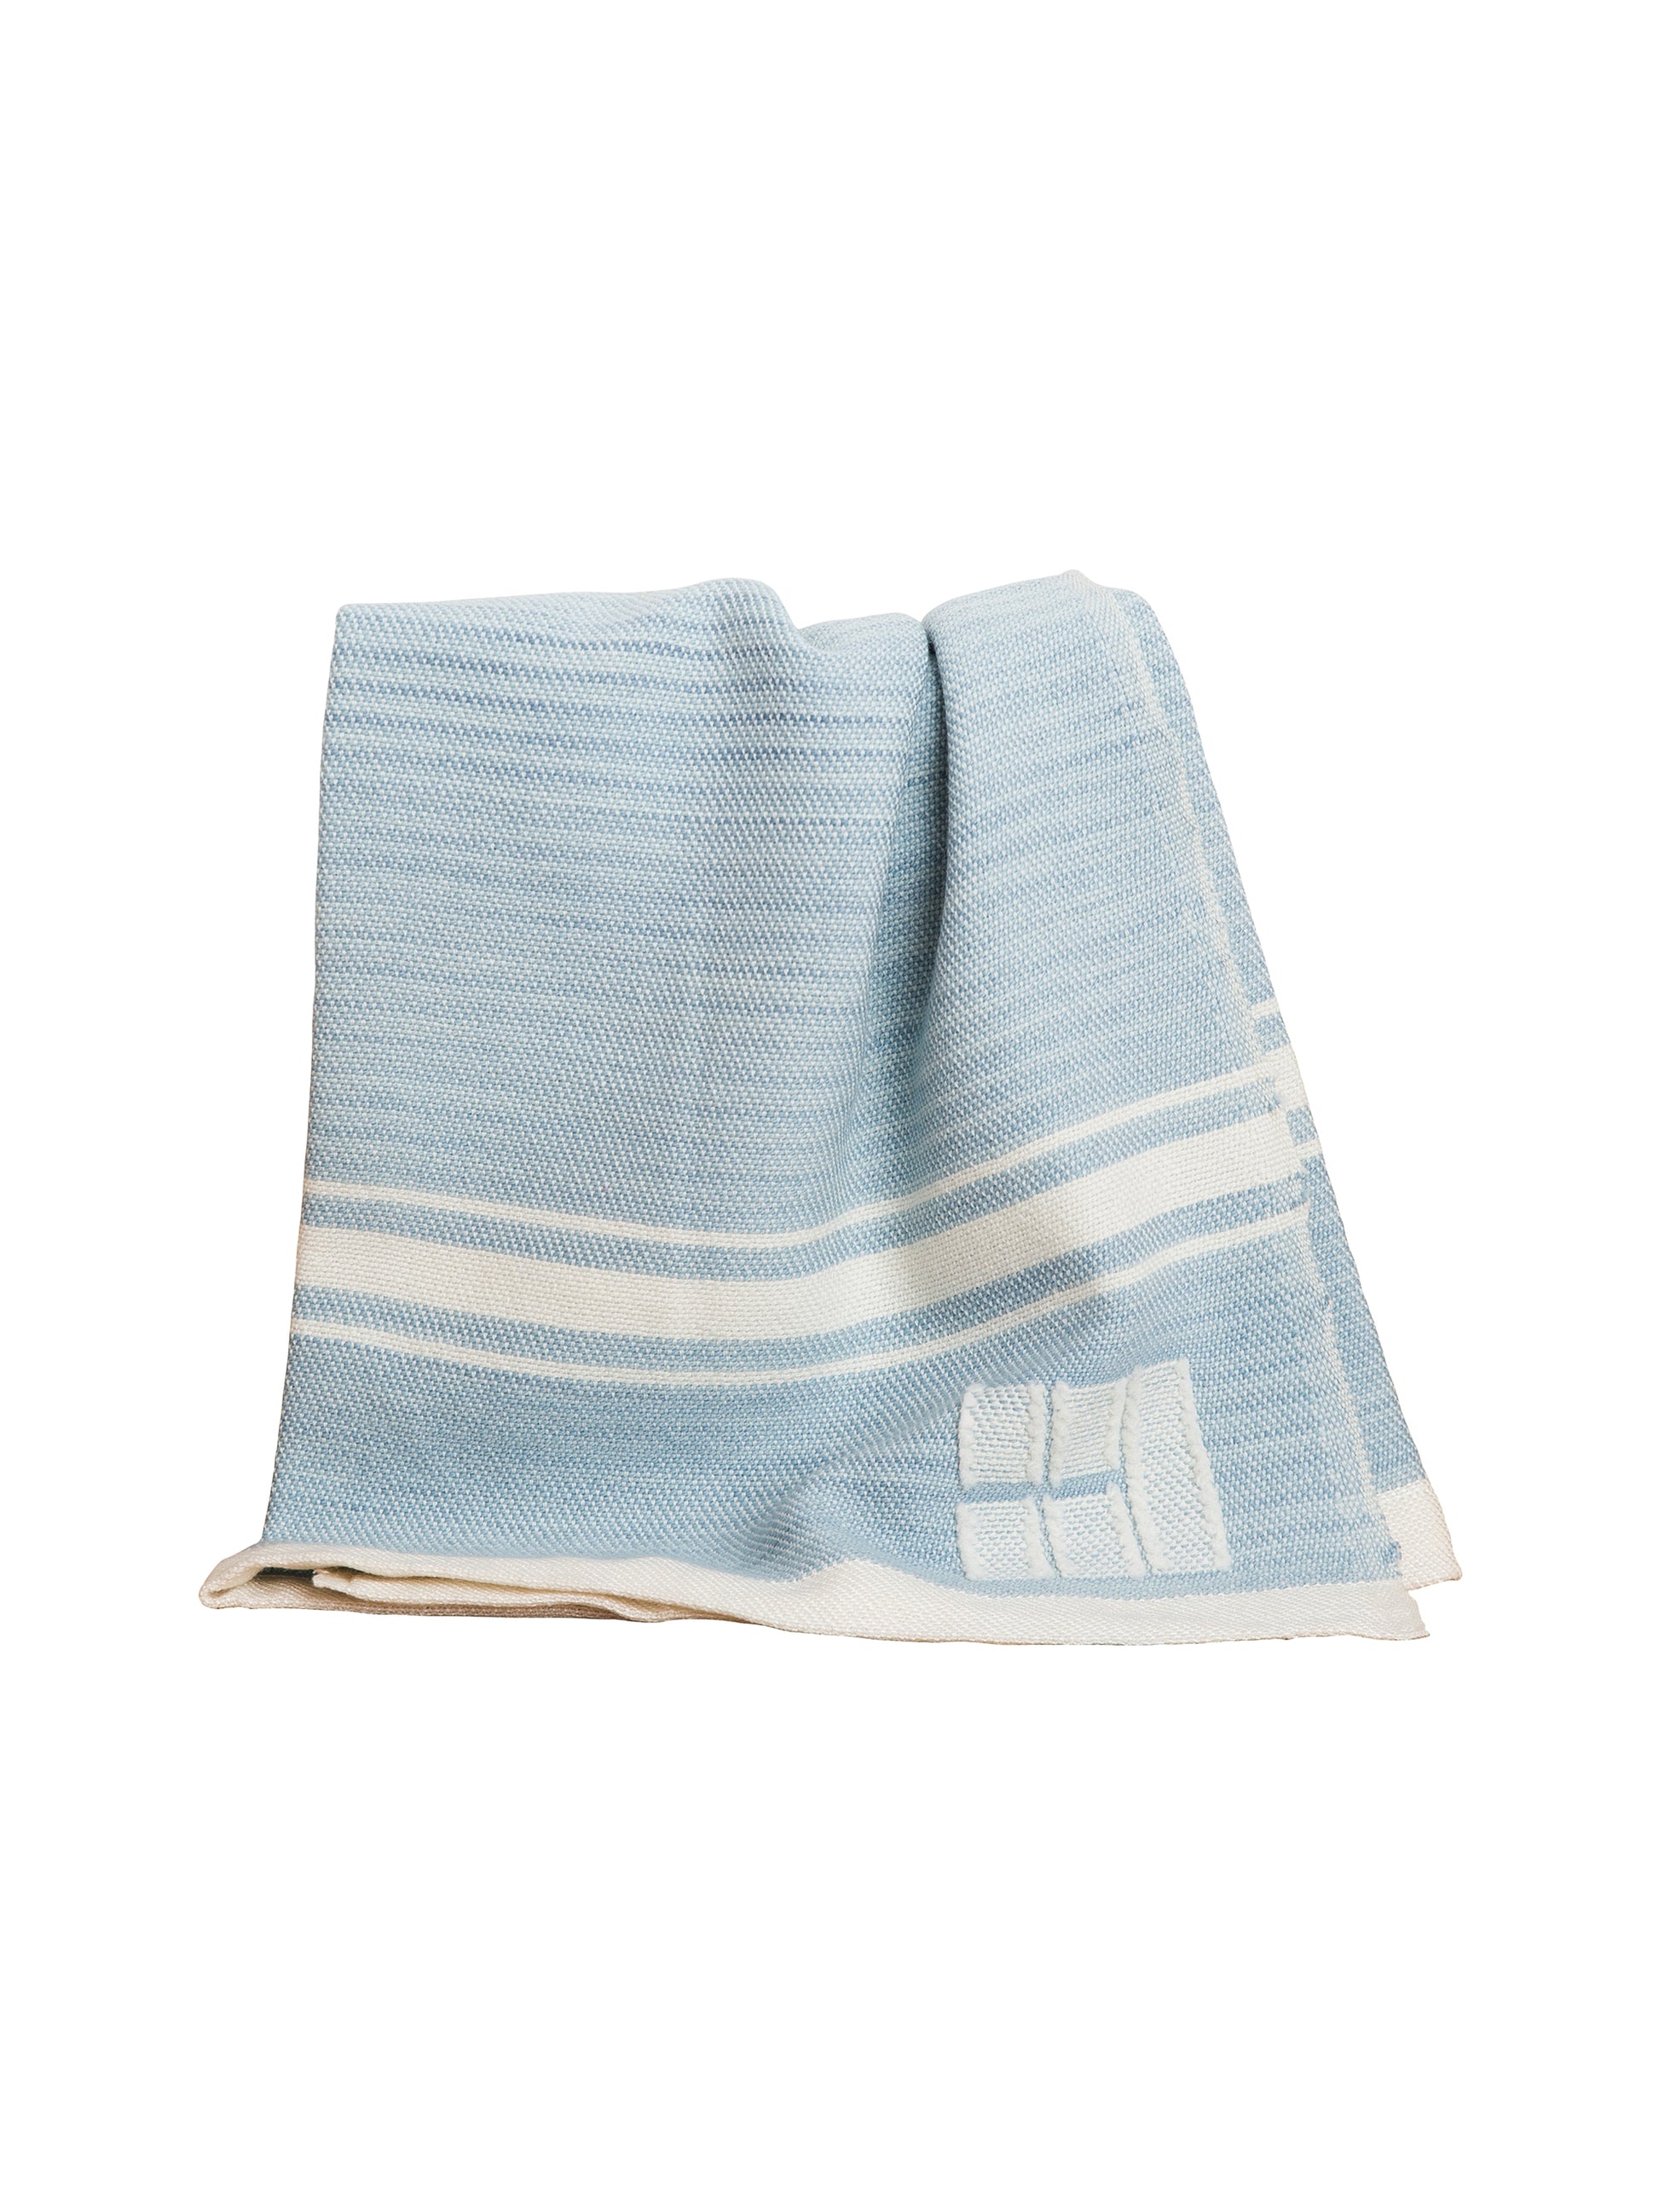 Swans Island Modern Grace Baby Blanket Sky Blue with White Weston Table